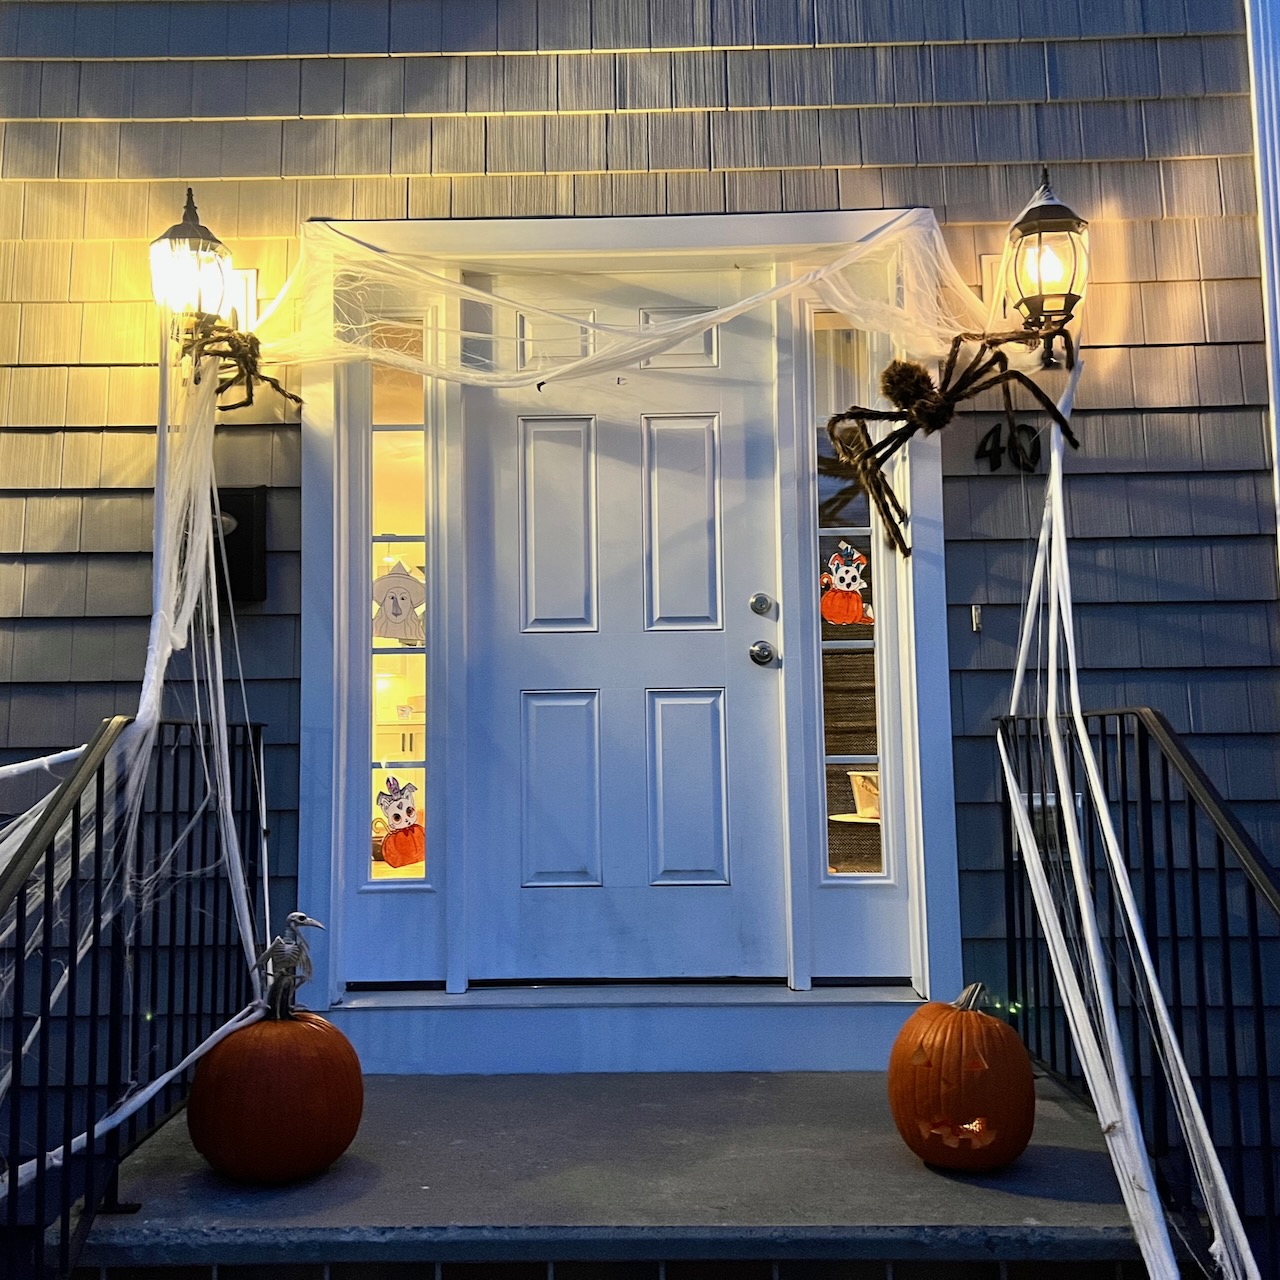 Our house, decorated for Halloween